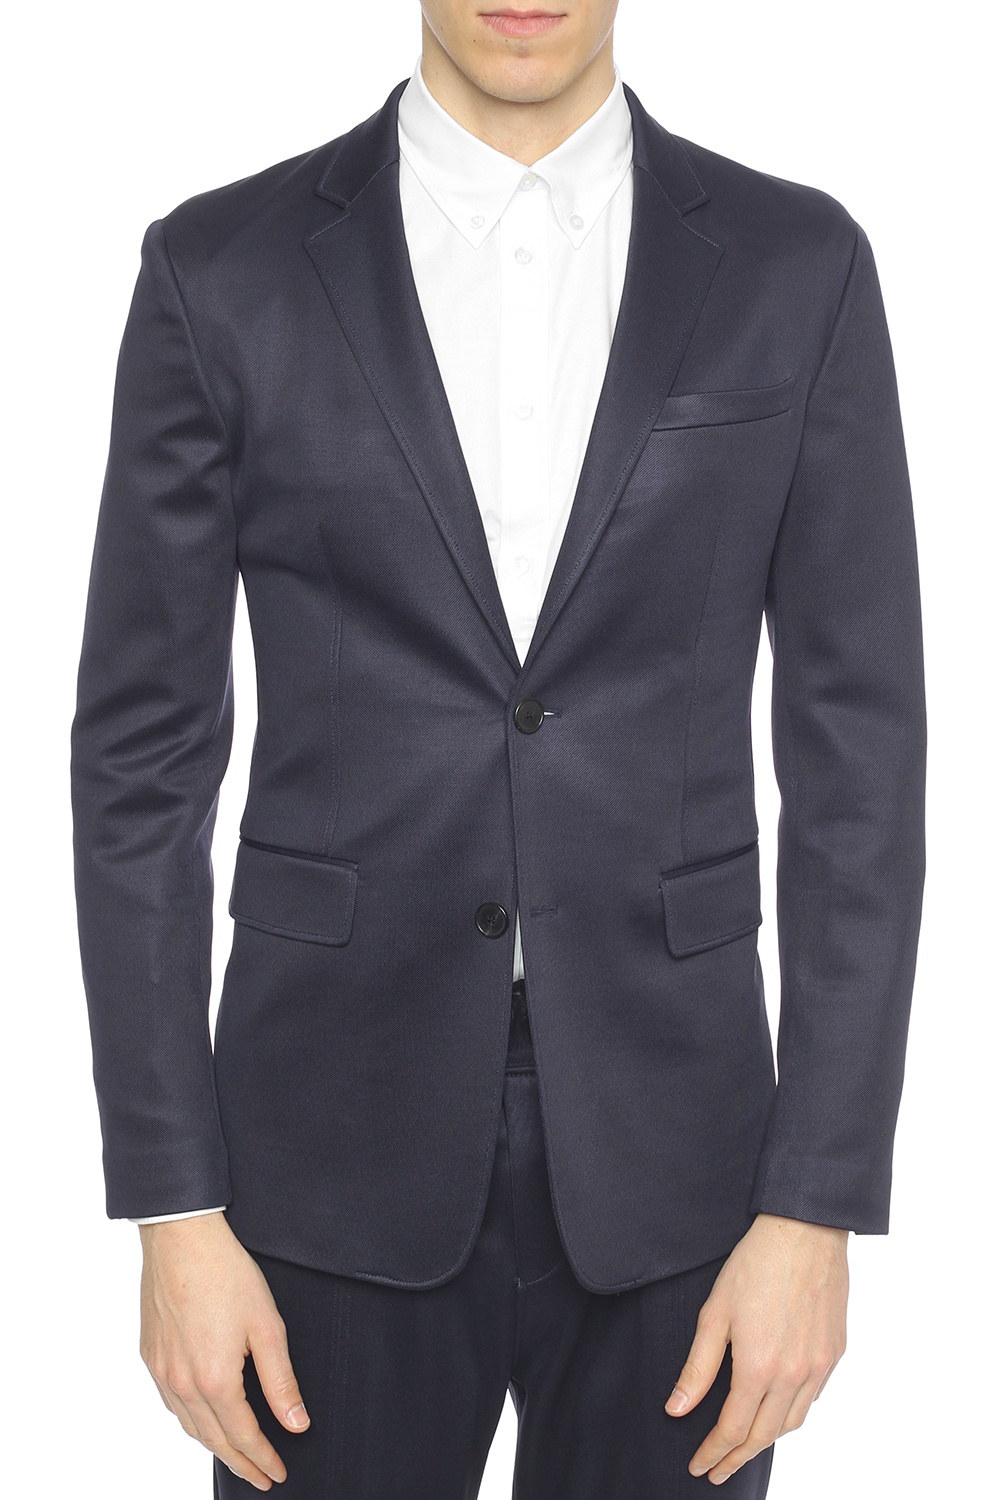 Givenchy Double-vented suit | Men's Clothing | Vitkac